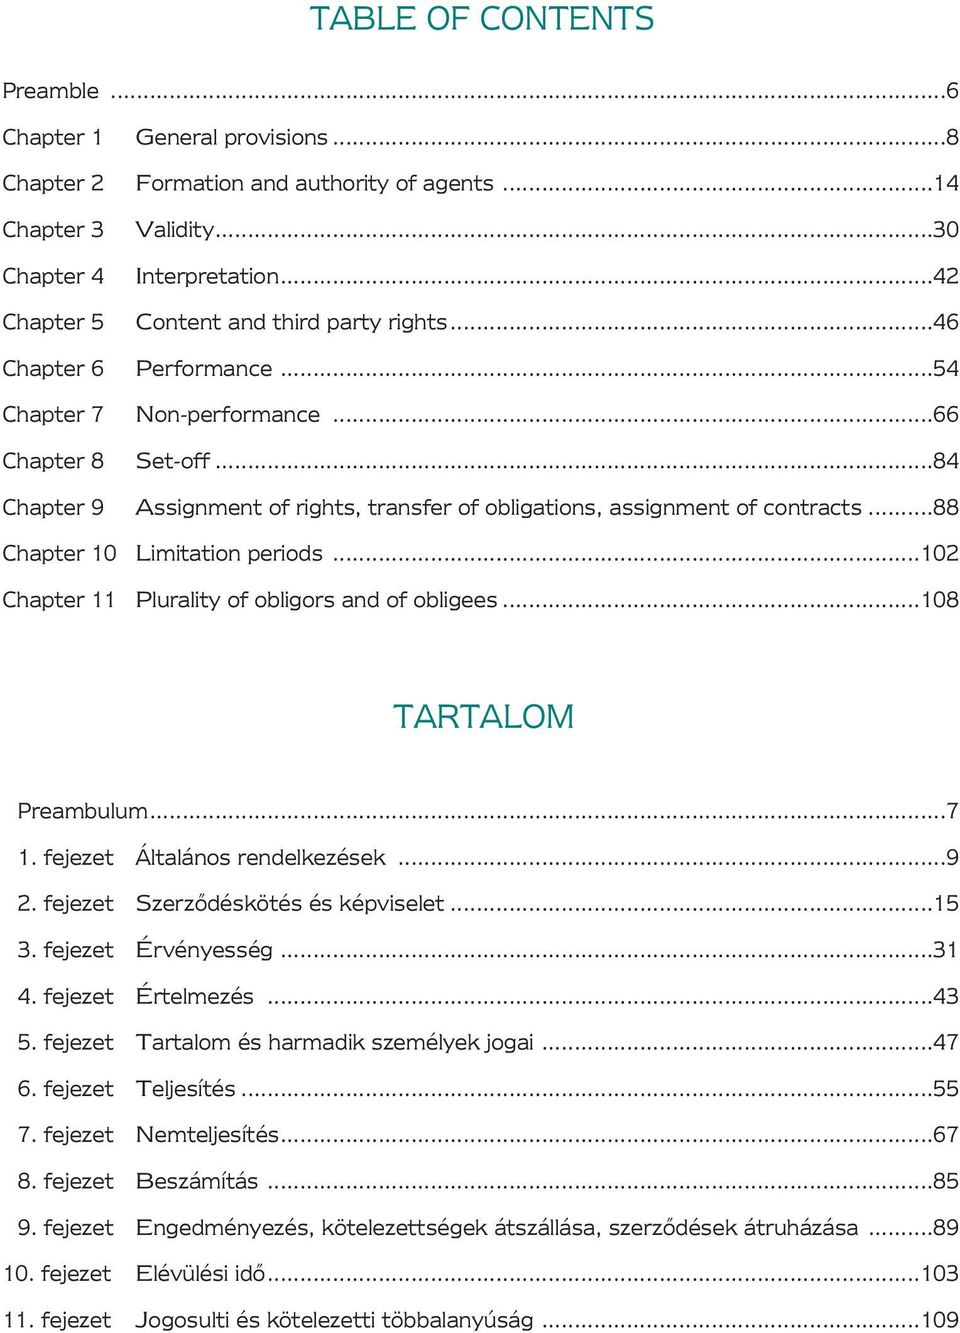 ..84 Chapter 9 Assignment of rights, transfer of obligations, assignment of contracts...88 Chapter 10 Limitation periods...102 Chapter 11 Plurality of obligors and of obligees...108 TARTALOM Preambulum.